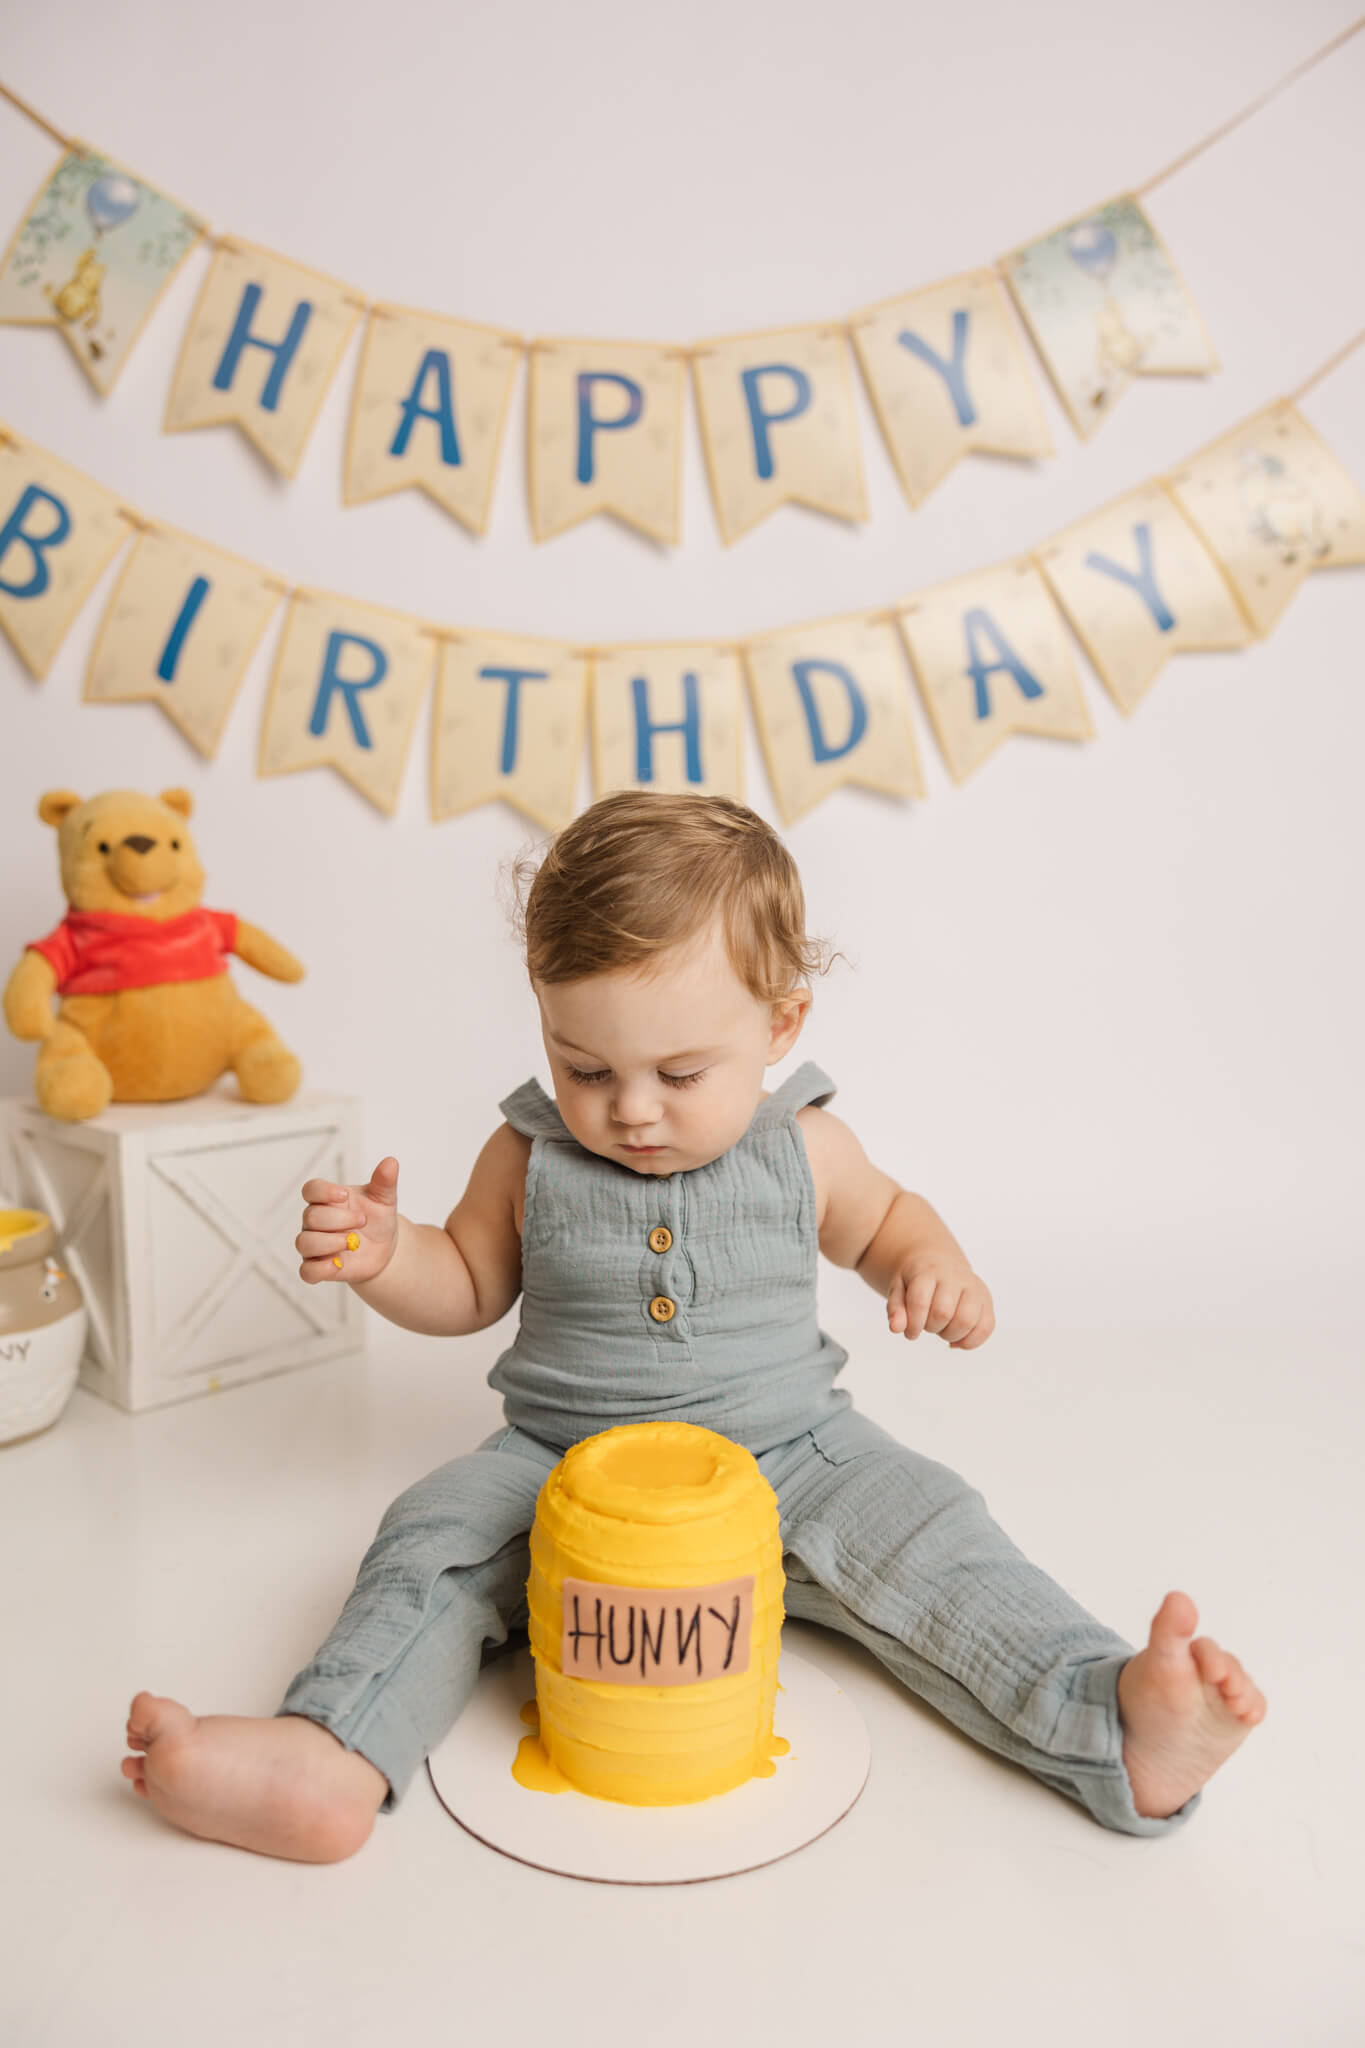 One year old enjoying his winnie the pooh themed cake smash session in the studio of molly berry photography.